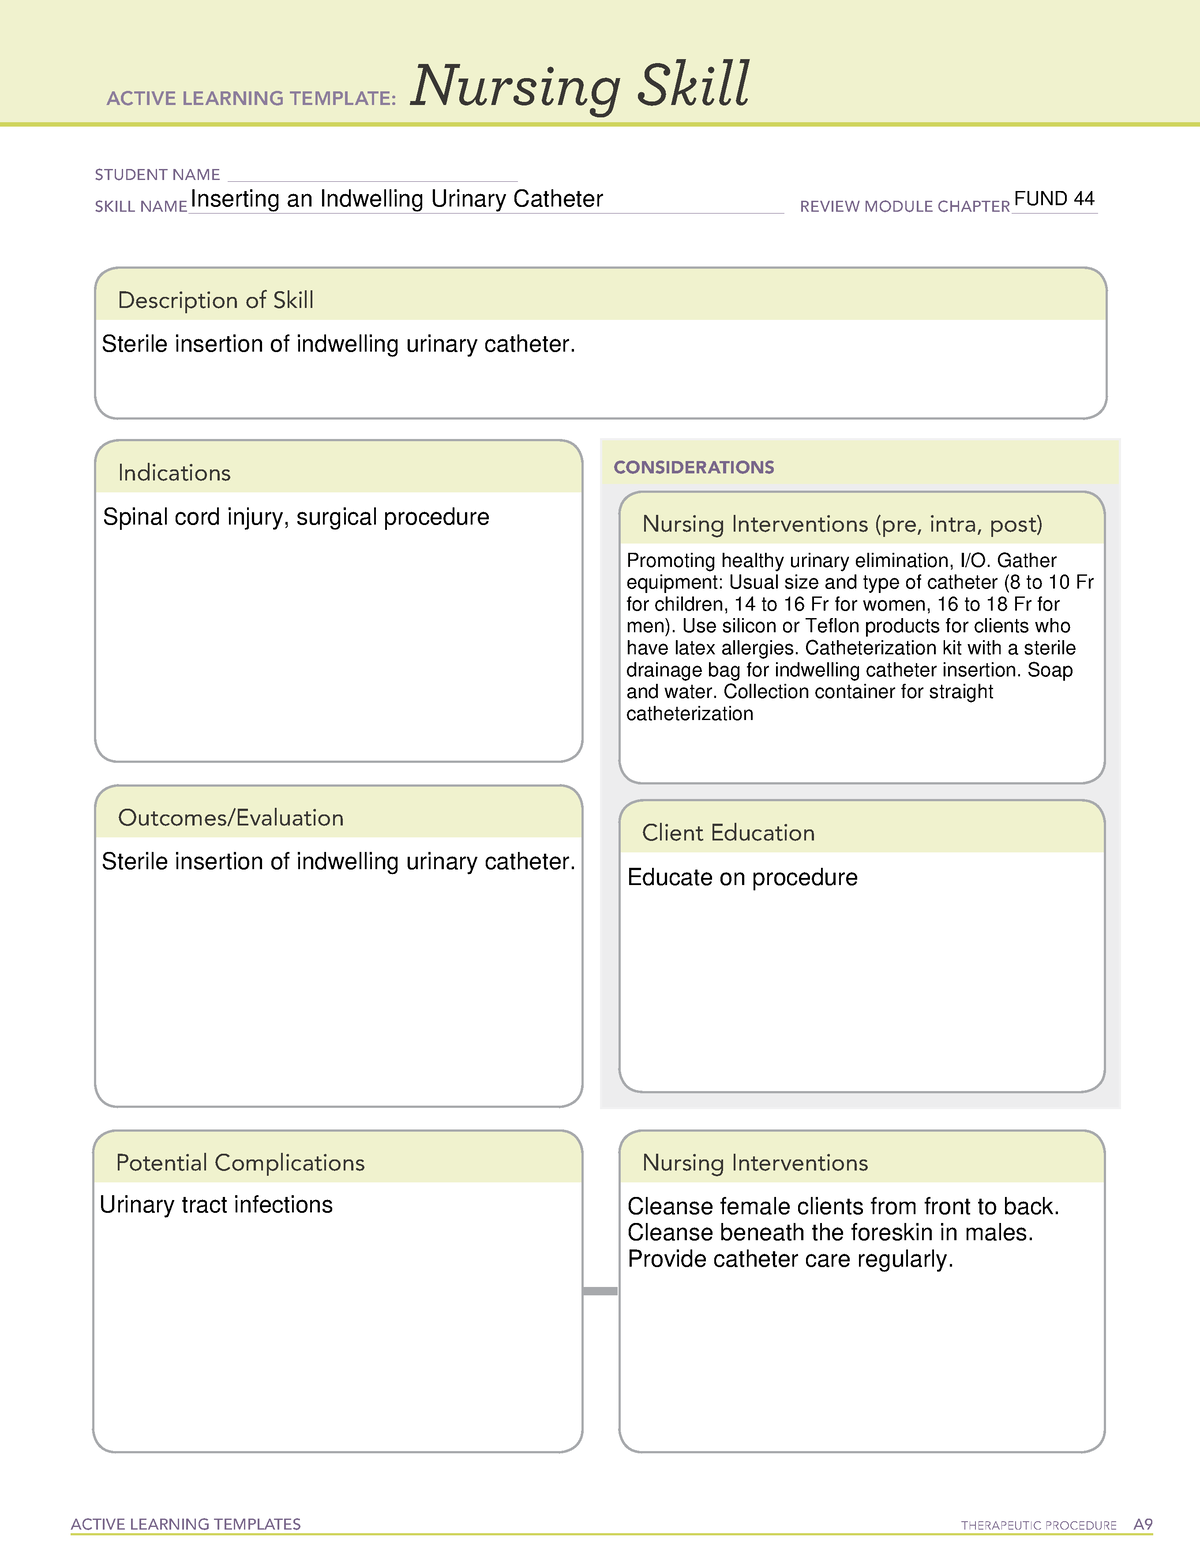 inserting-an-indwelling-urinary-catheter-active-learning-templates